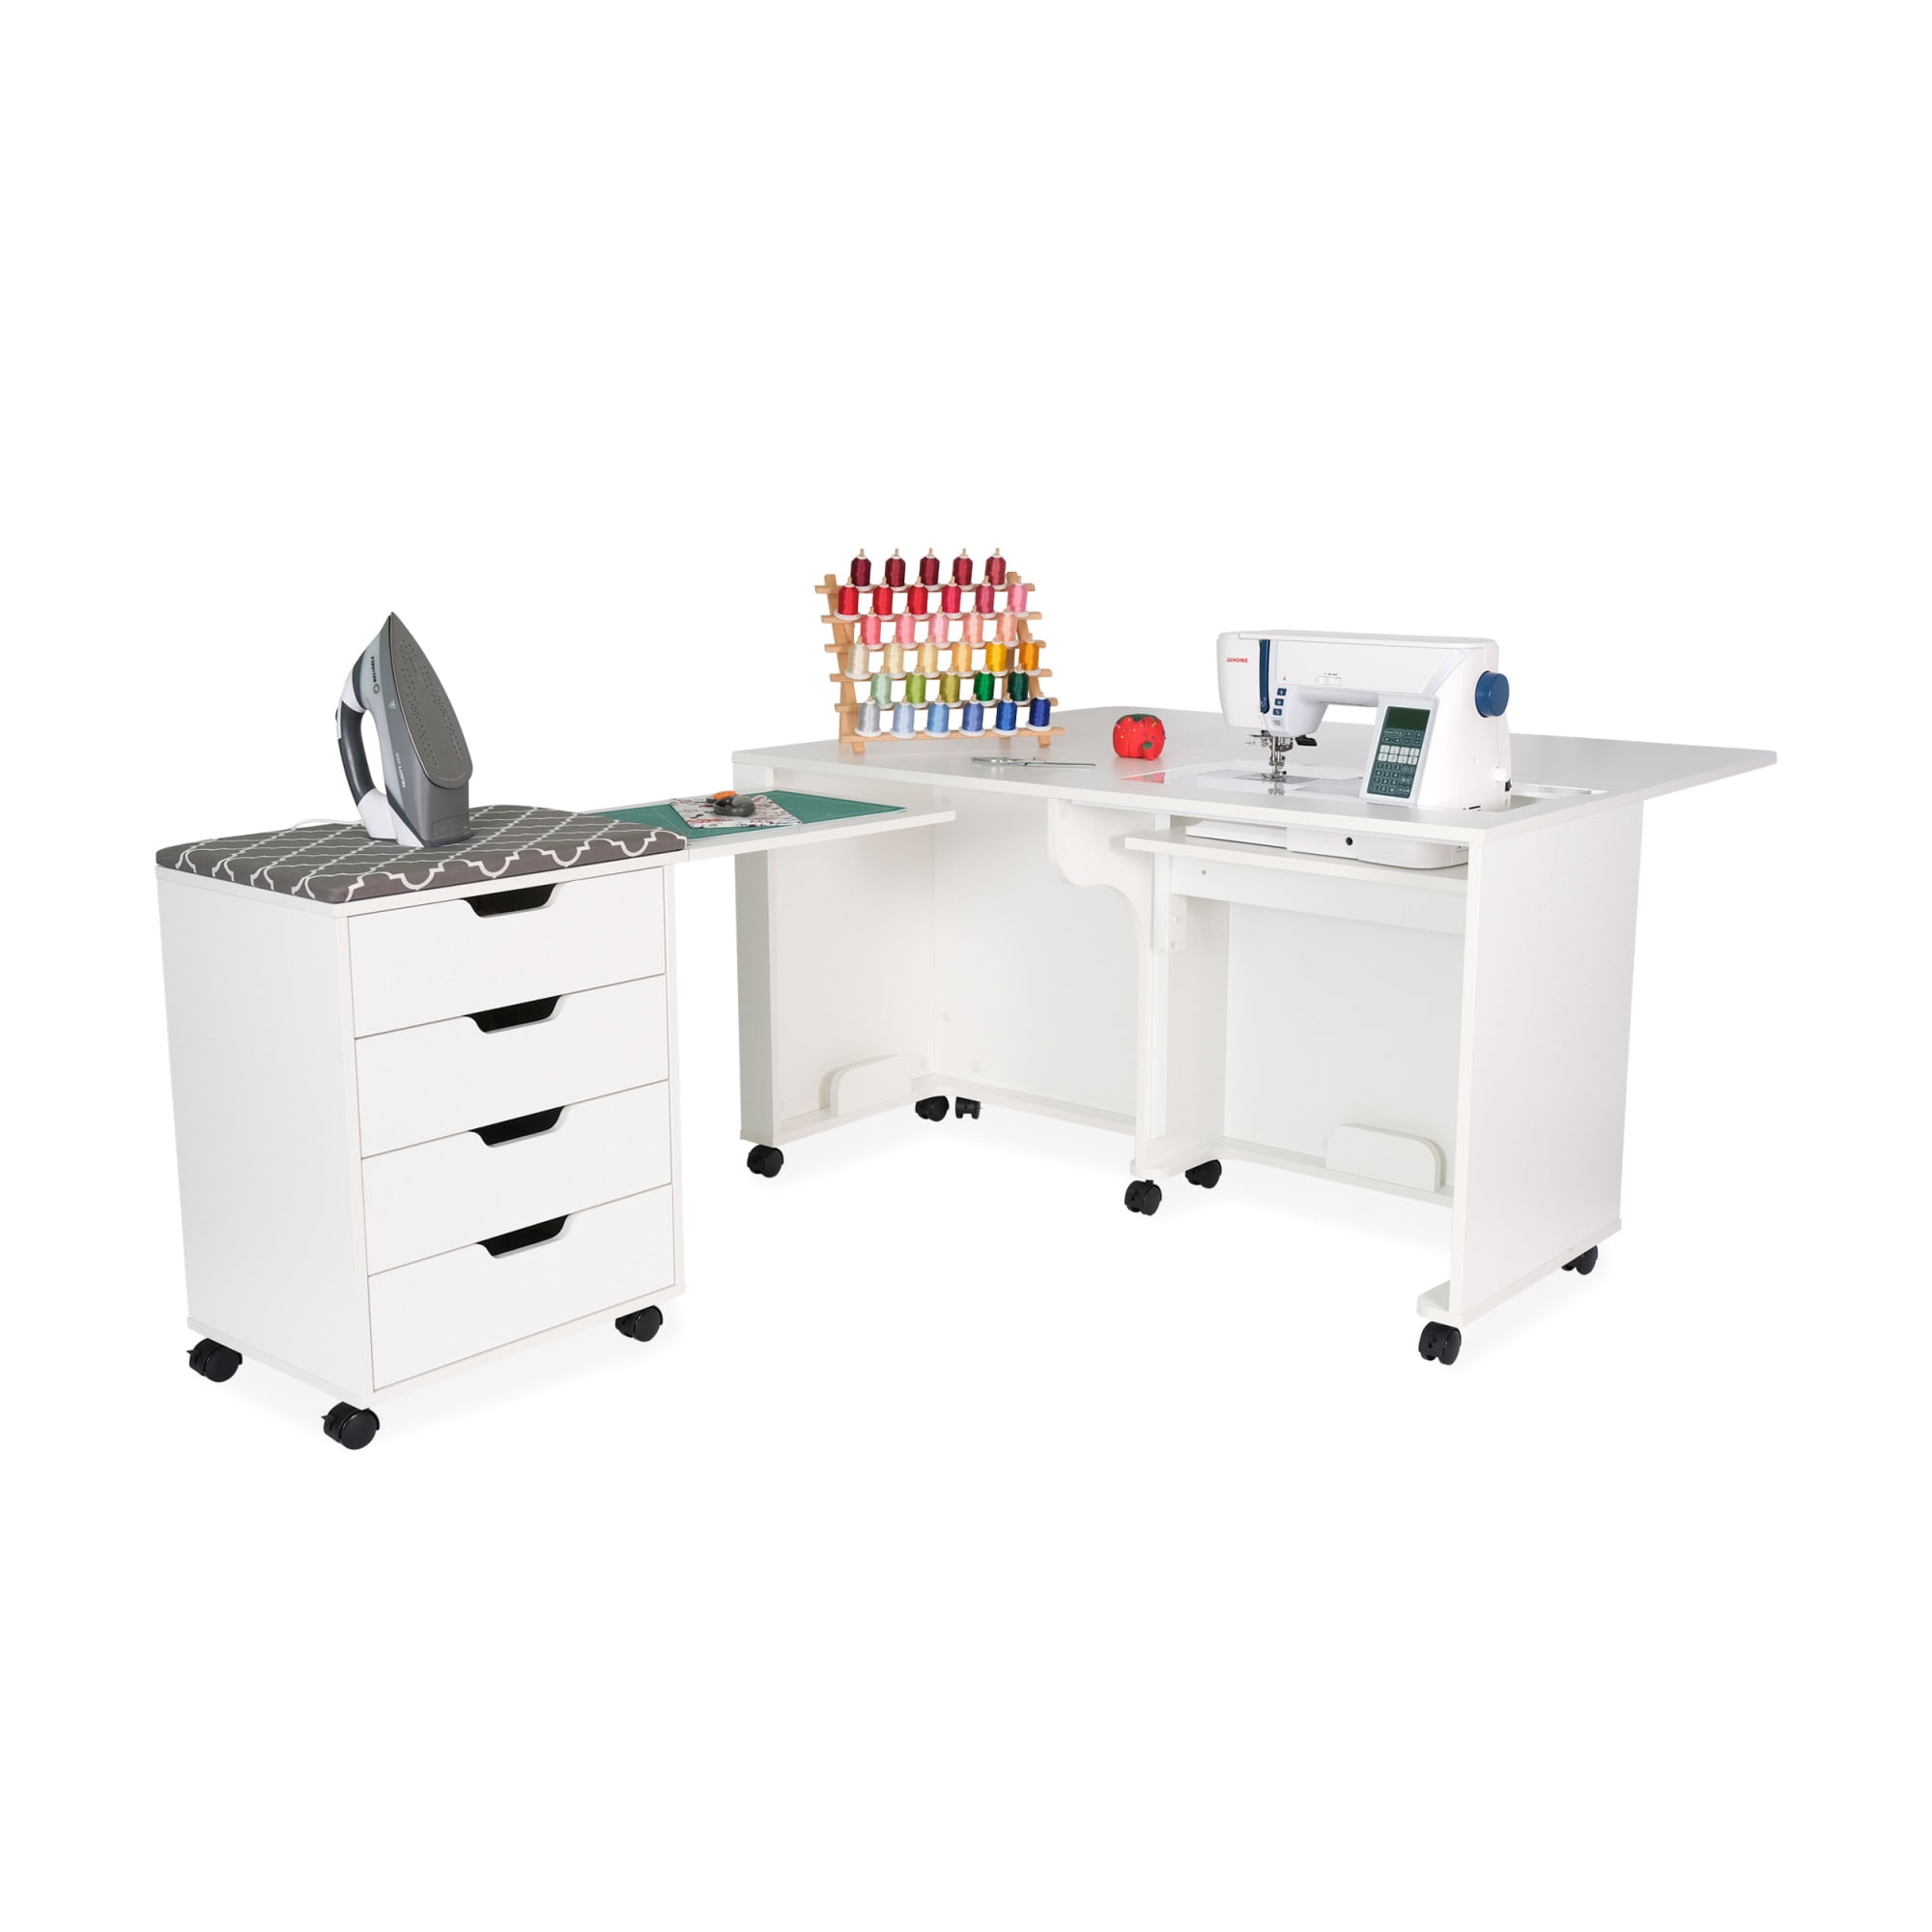 Laverne & Shirley Sewing Cabinet White - Walmart.com